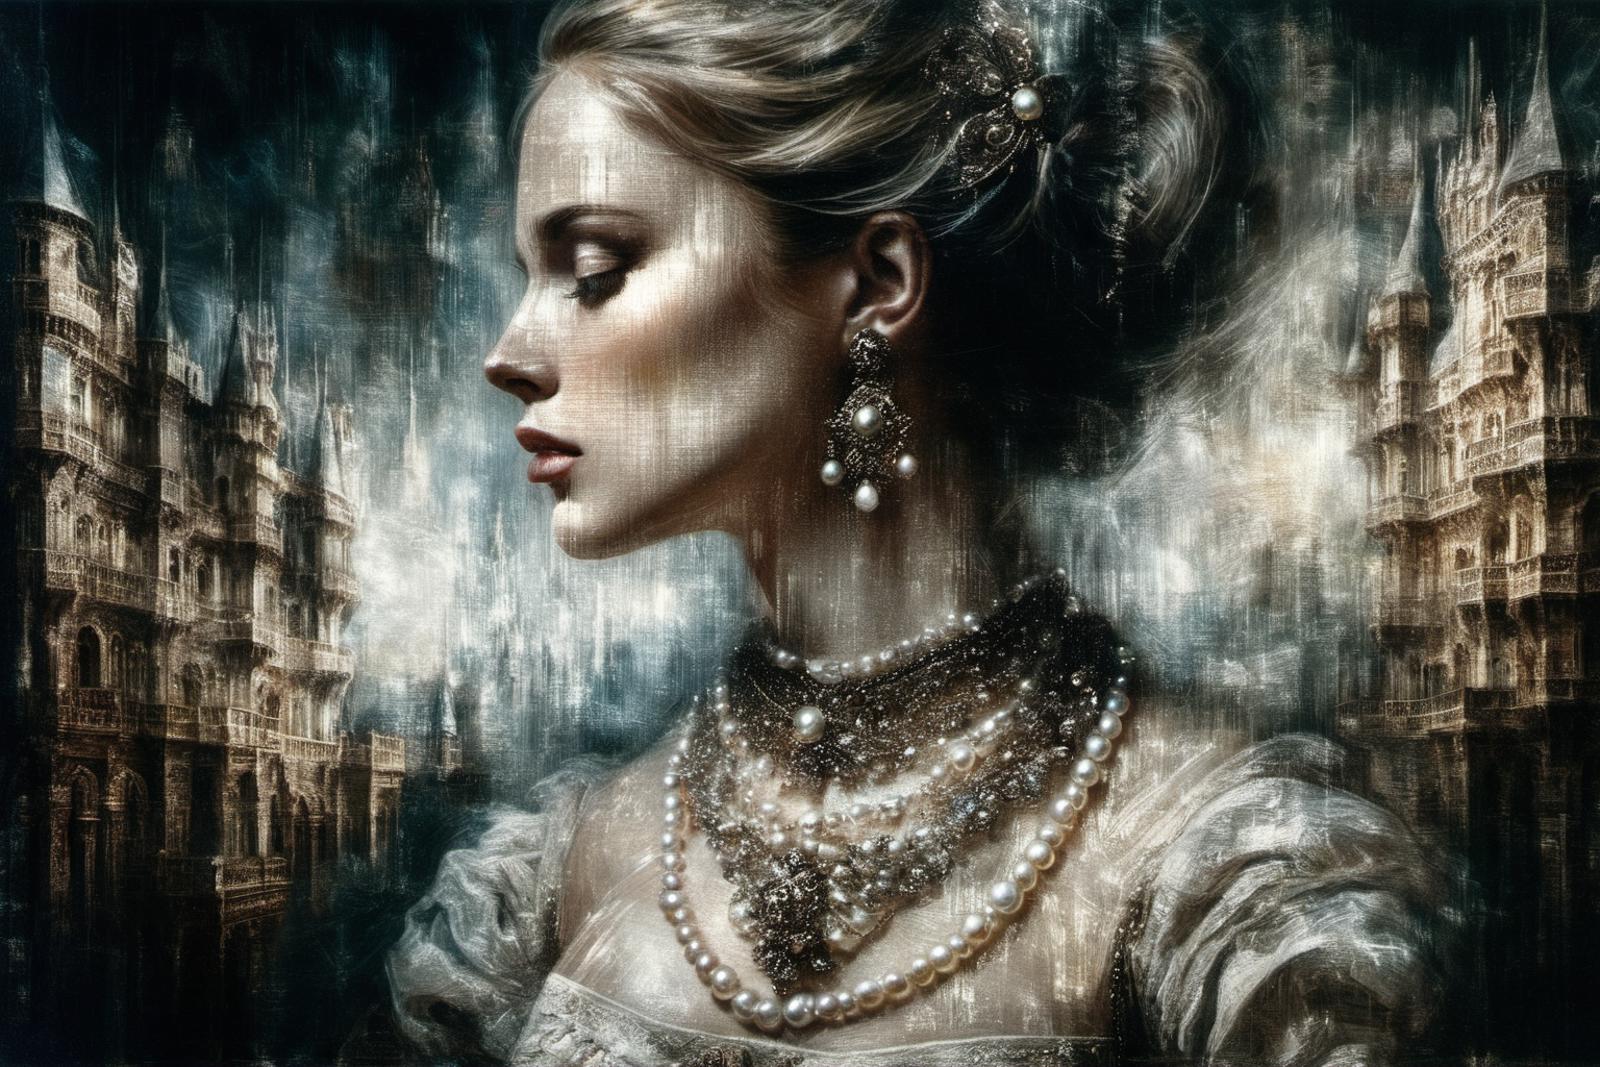 A woman wearing pearls and a tiara with a painting of a castle in the background.